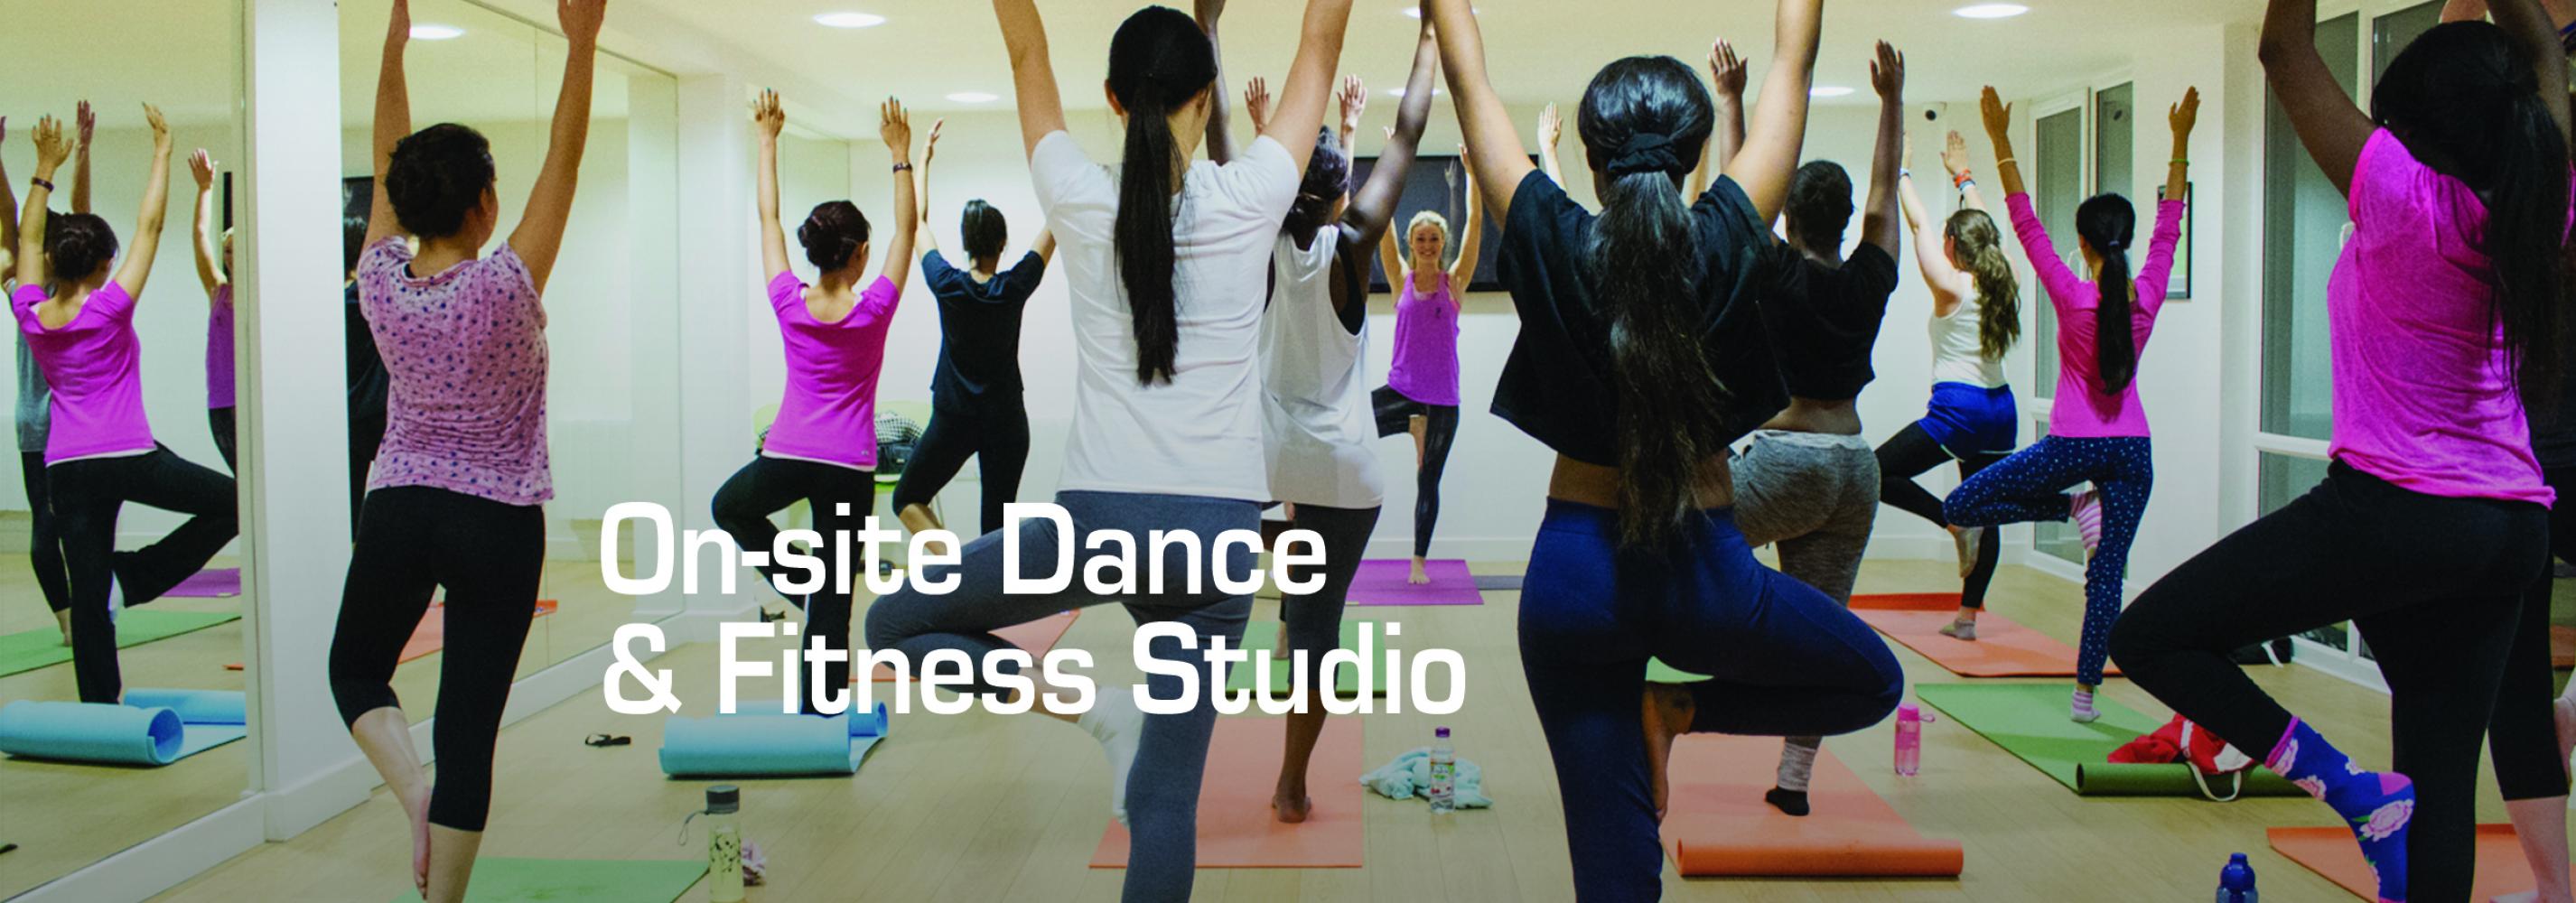 Take part in one of our free fitness classes or hire our dance and fitness studio for free